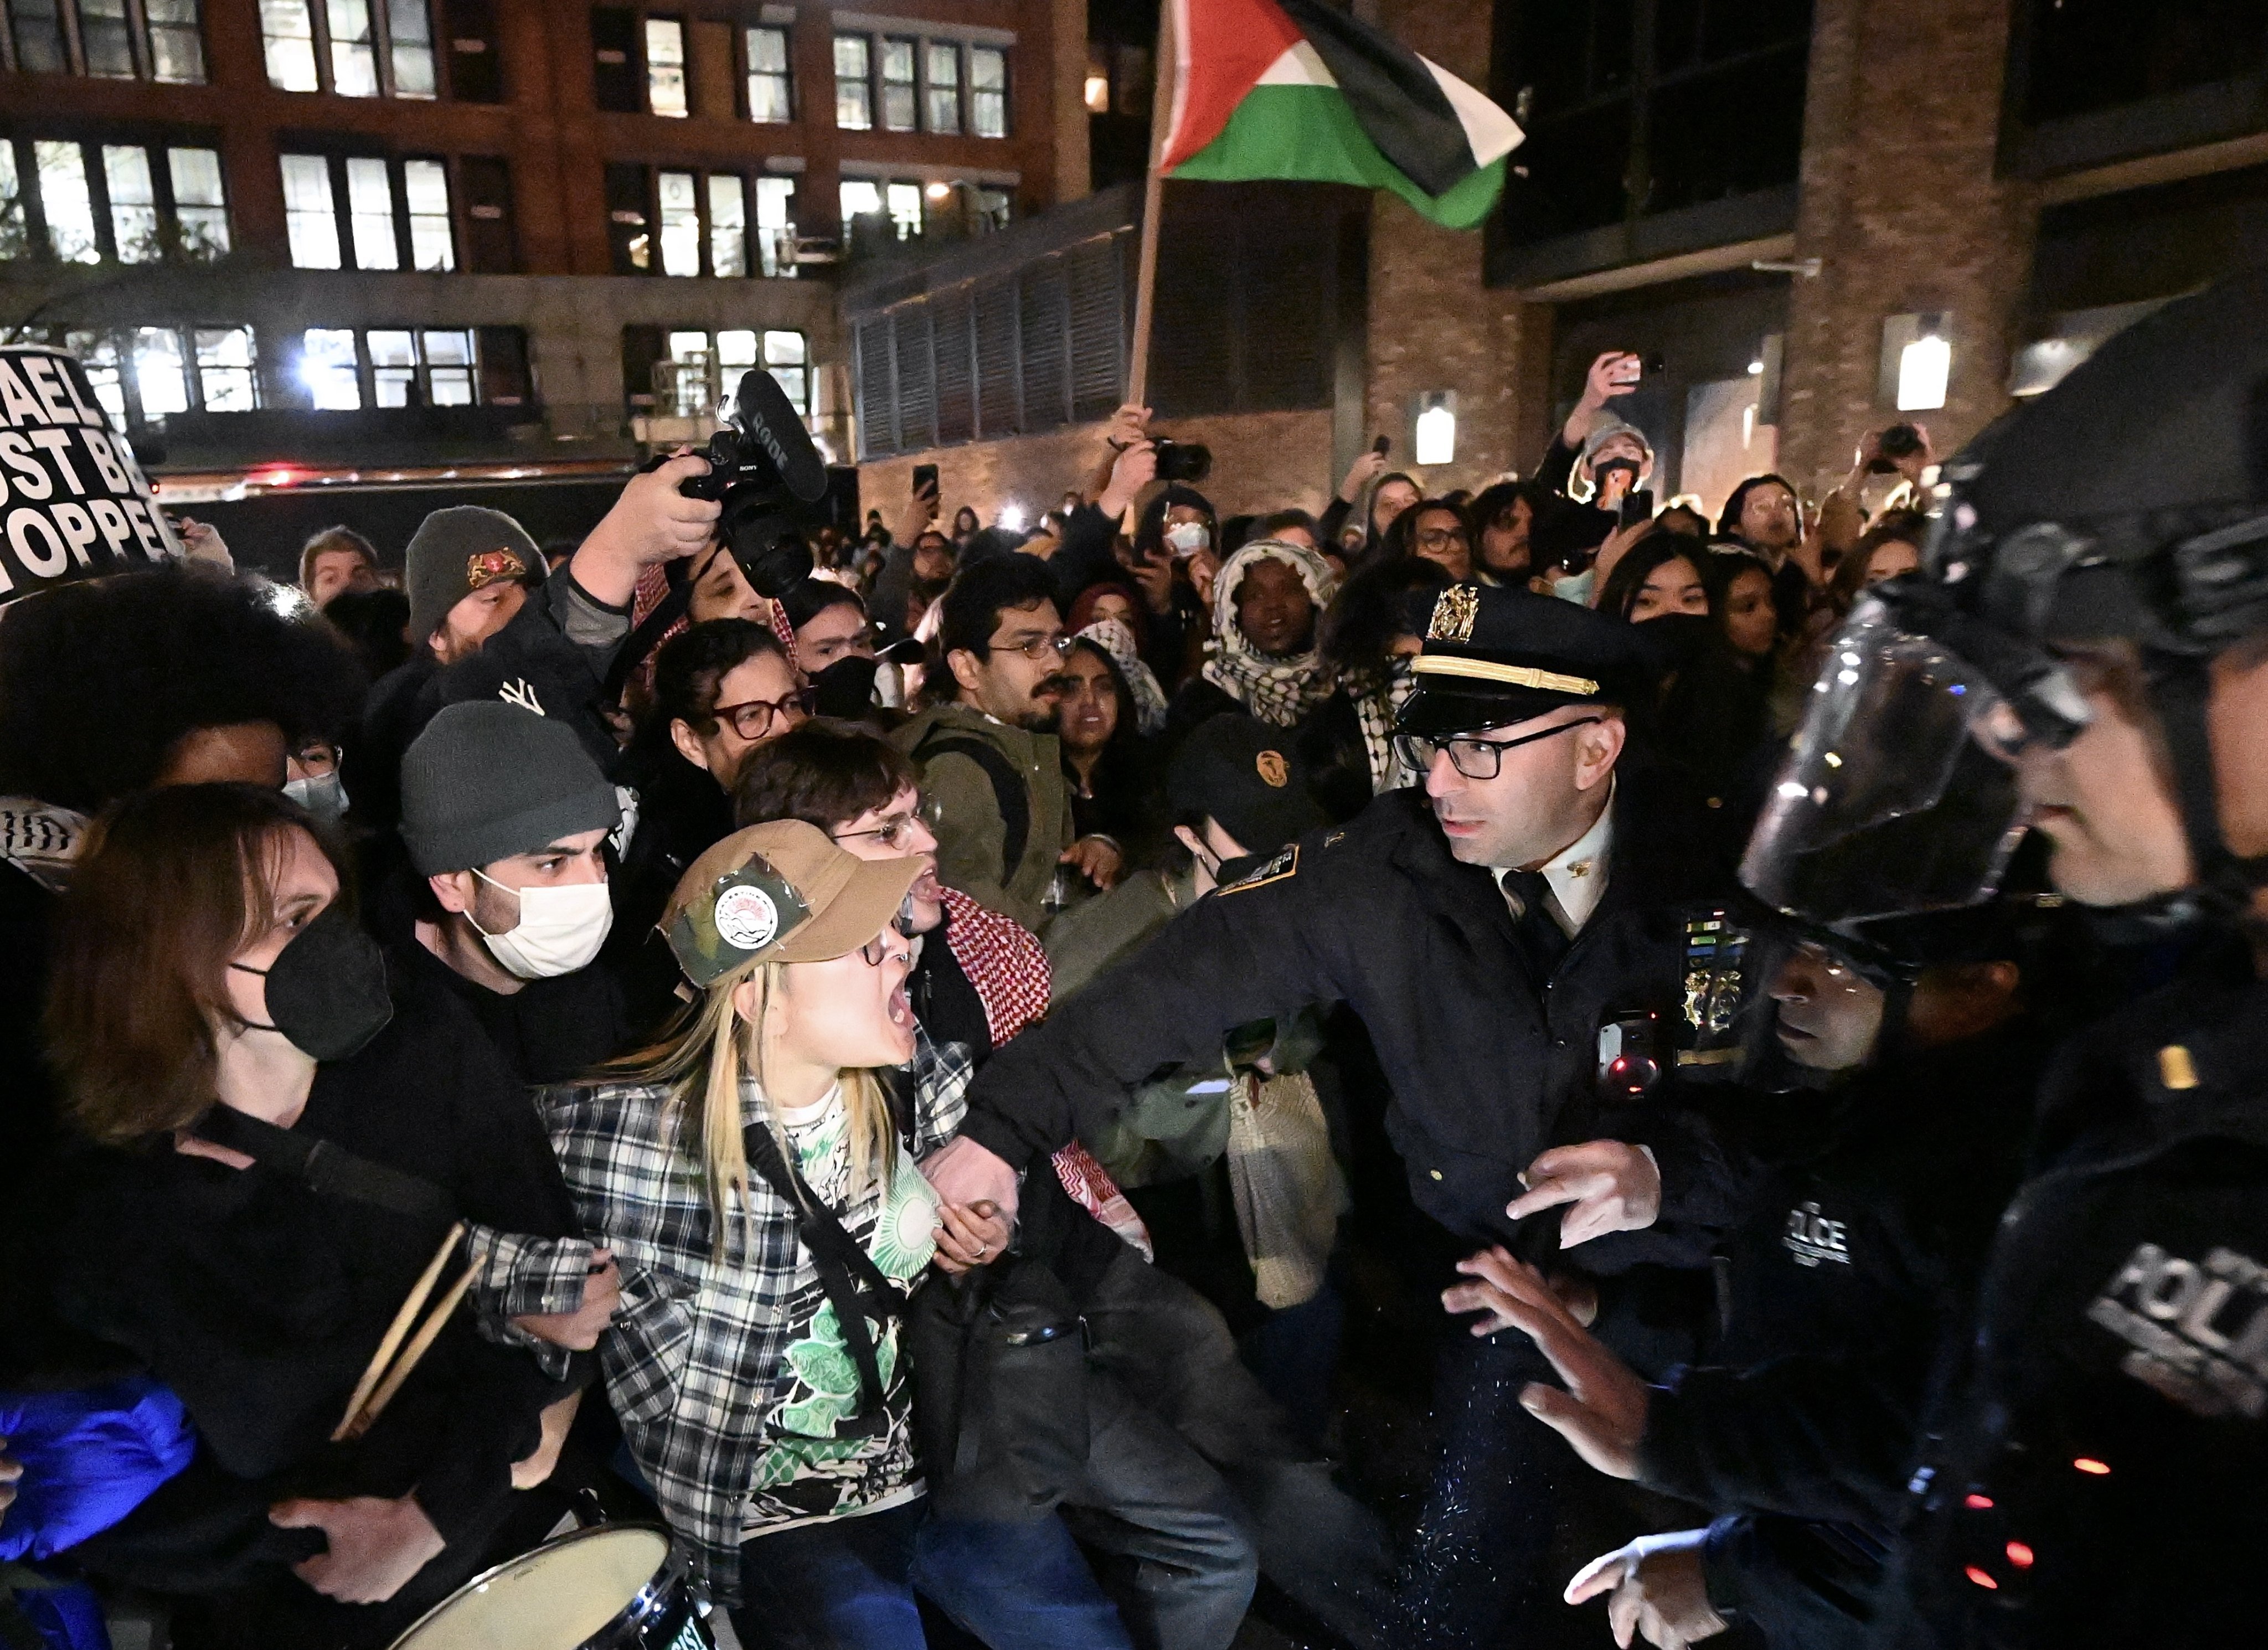 Police arrest more than 100 students who were demonstrating against Israel’s attacks on Gaza at New York University on April 22. Universities are increasingly characterised by a refusal to consider divergent viewpoints on major issues. Photo: Anadolu via Getty Images